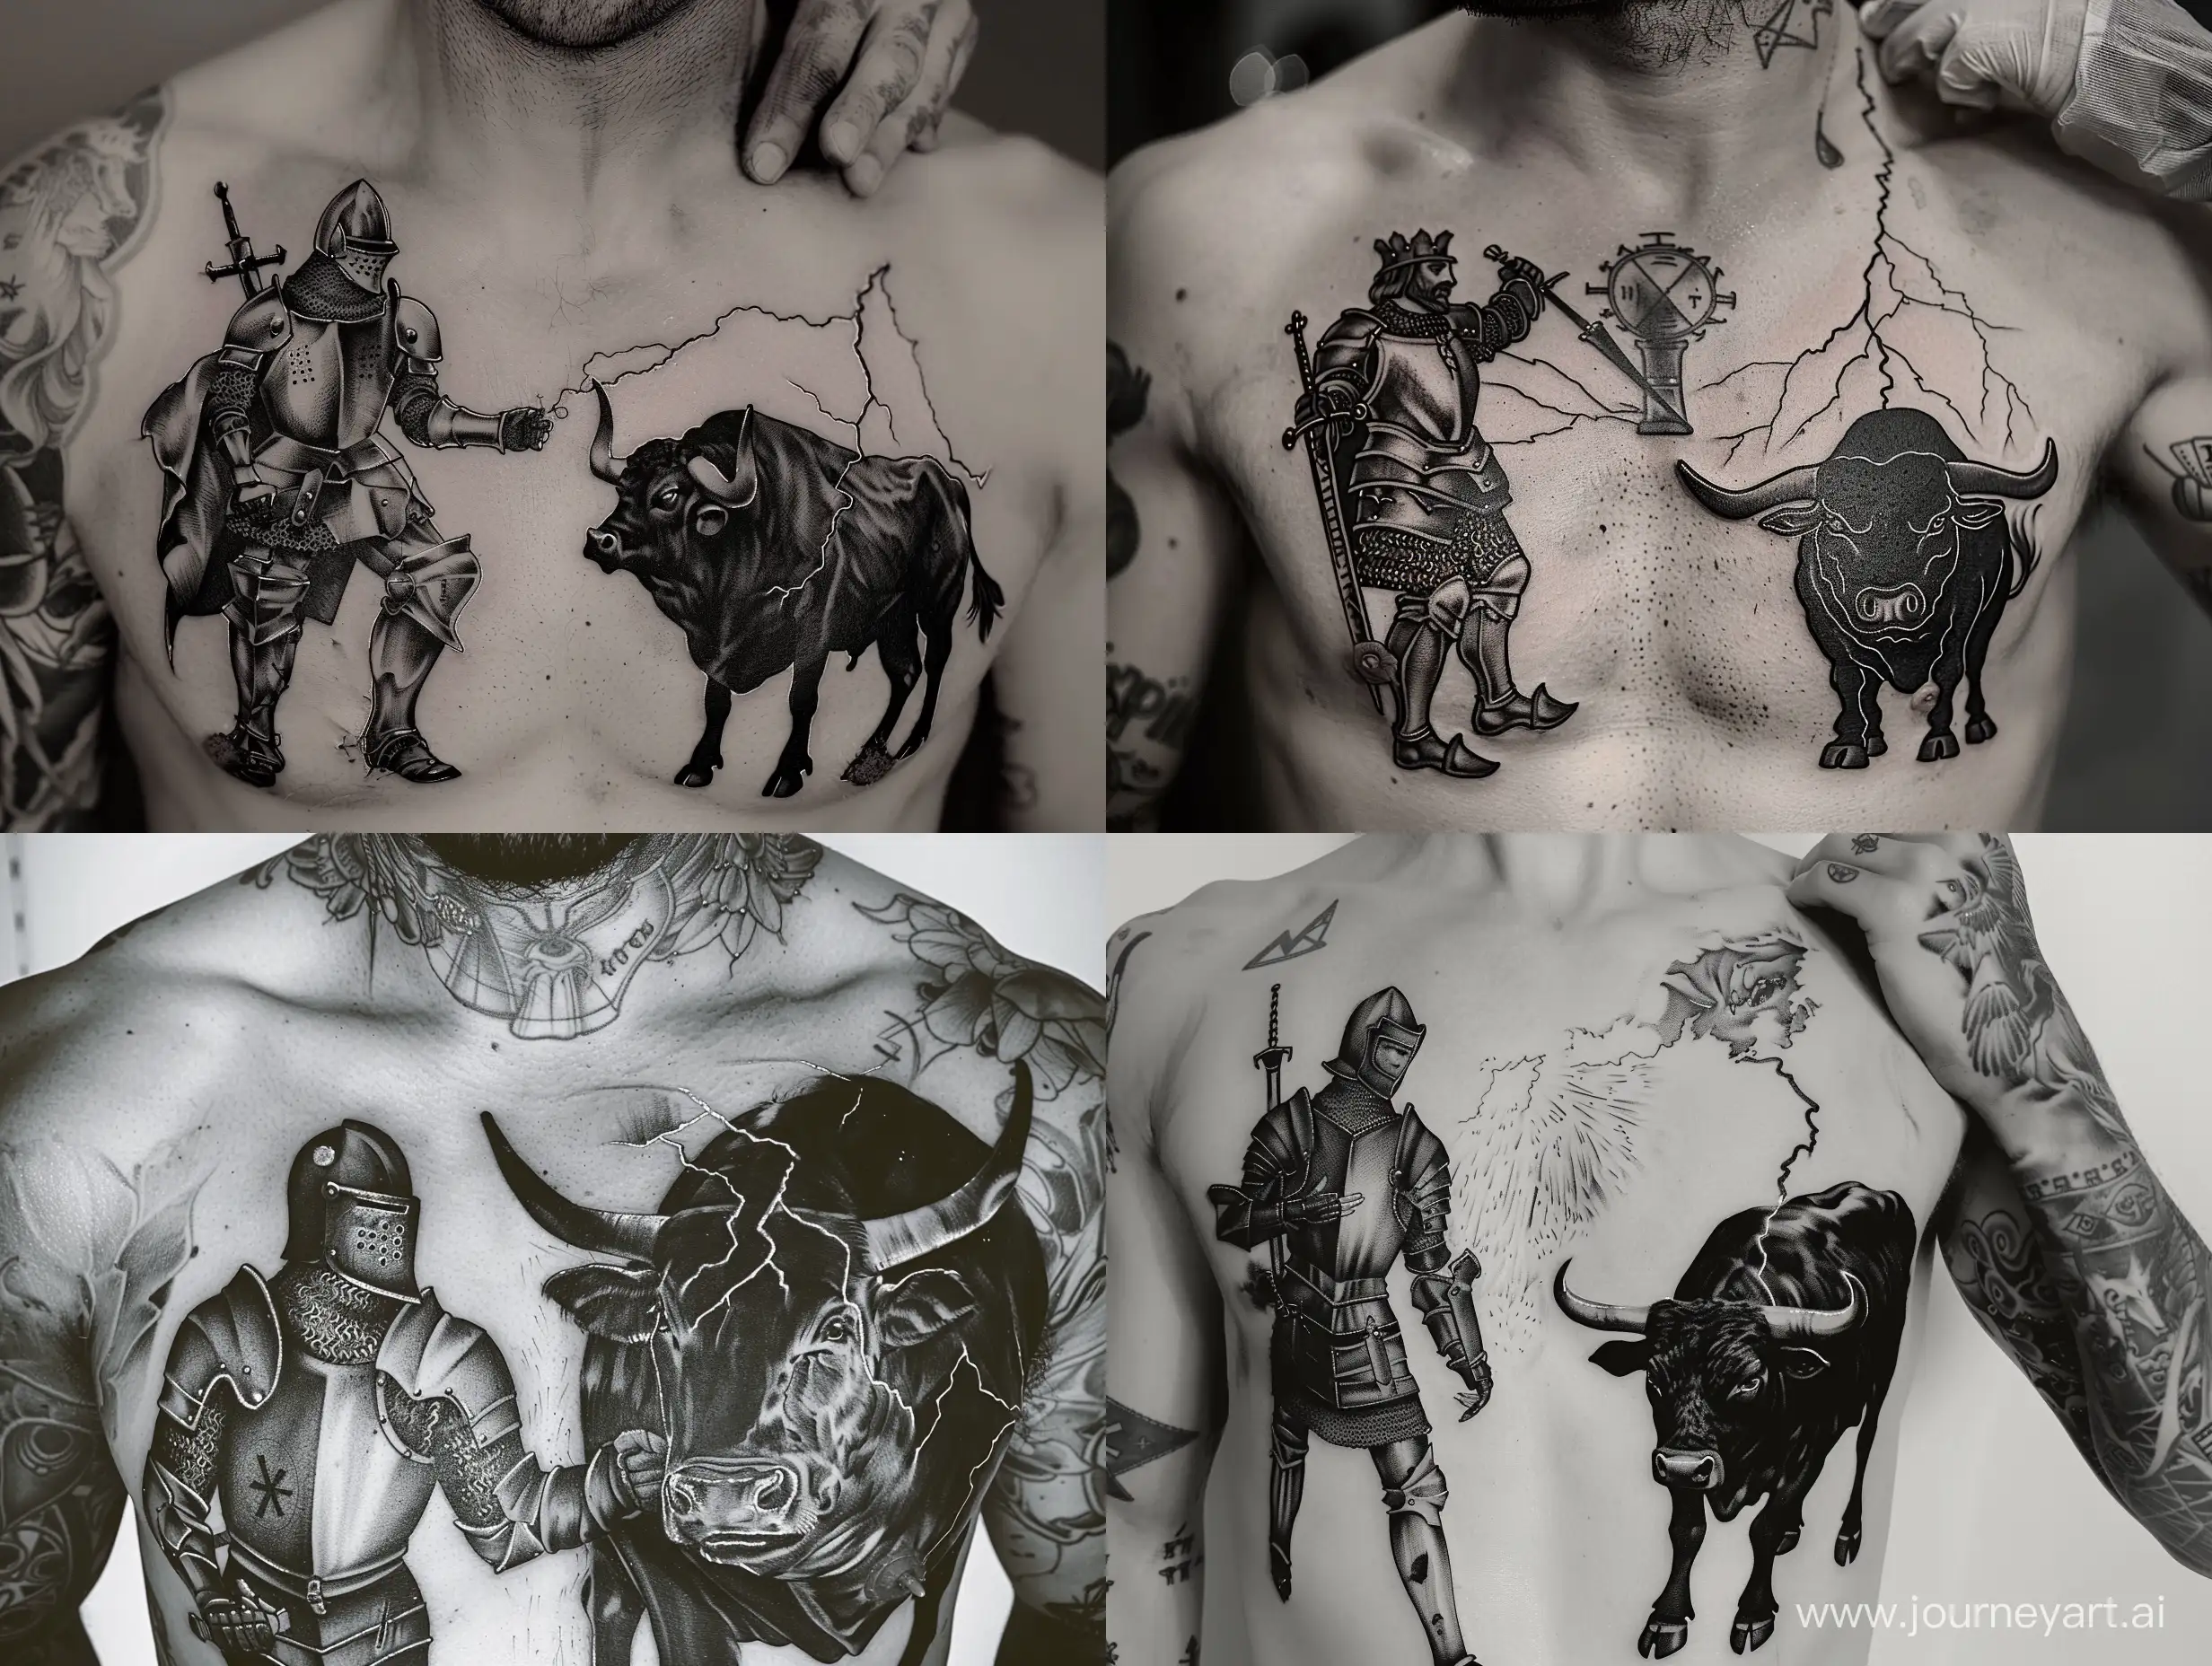 Symmetrical-Engraving-Tattoo-of-Knight-and-Bull-with-Lightning-Strike